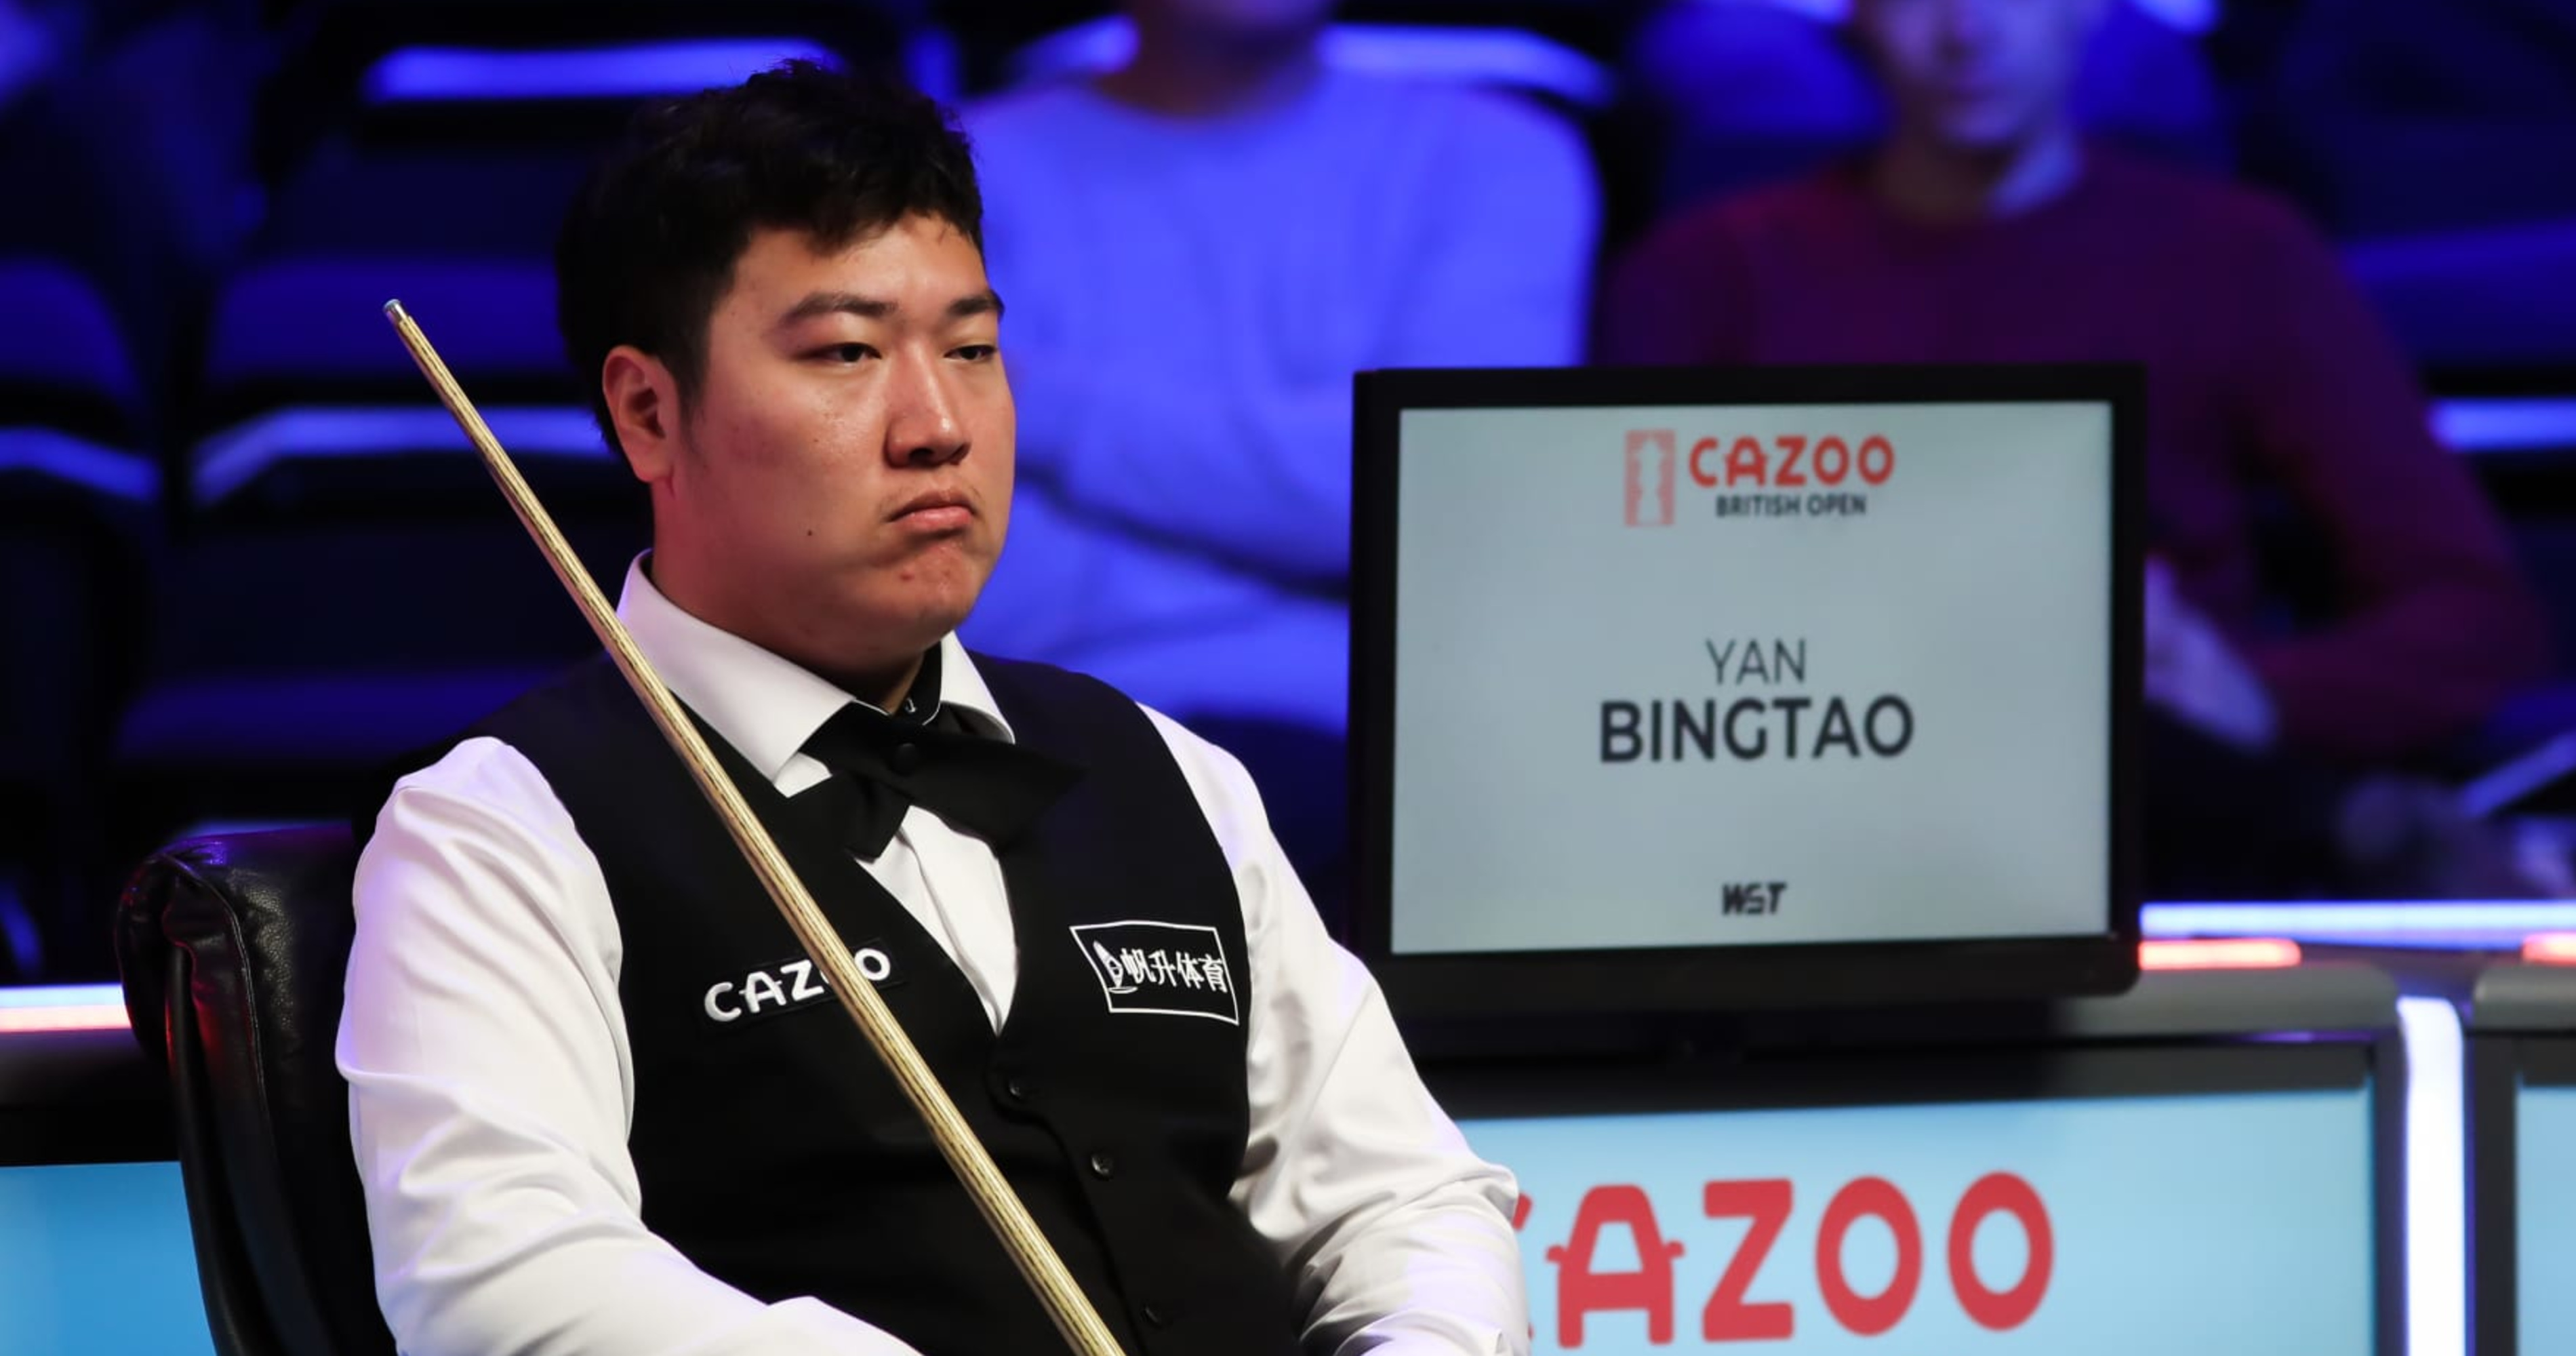 Yan Bingtao Suspended from World Snooker Tour Amid Match-Fixing Investigation News, Scores, Highlights, Stats, and Rumors Bleacher Report